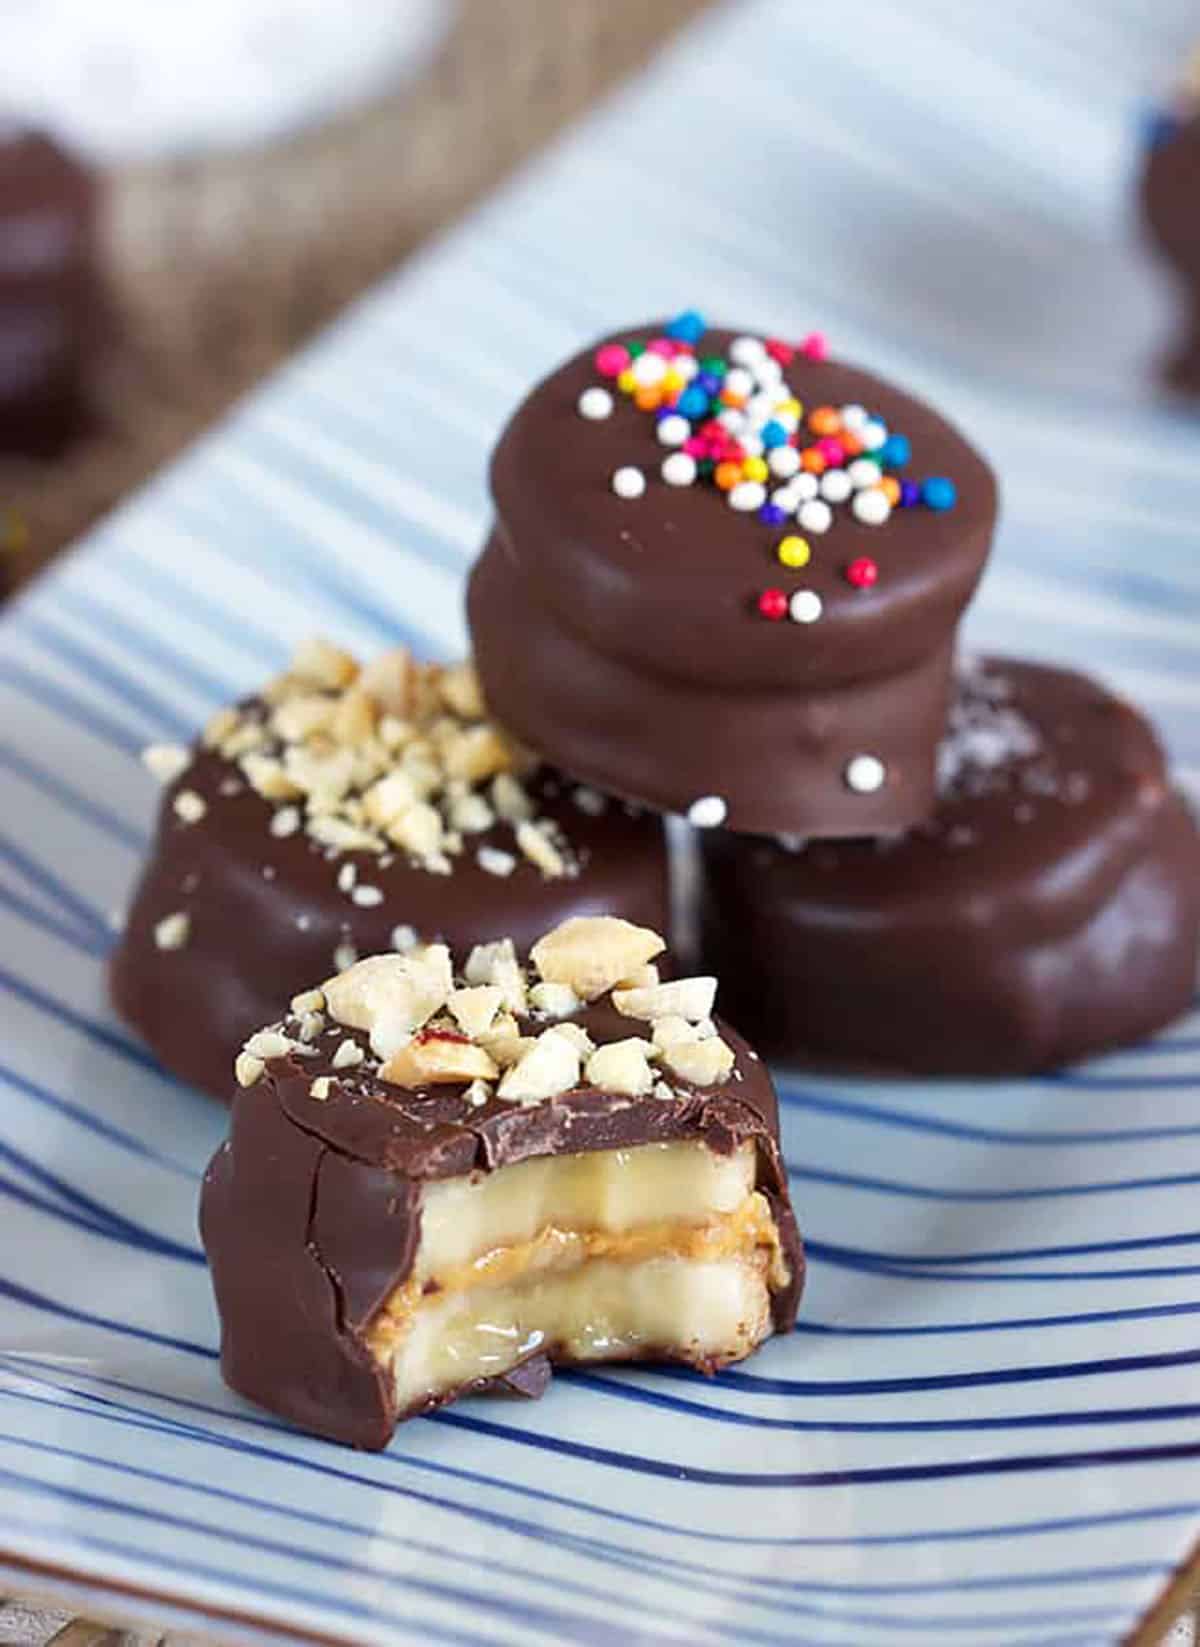 Frozen Chocolate covered banana bites on a blue and white striped plate with a bite out of one of the banana bites.